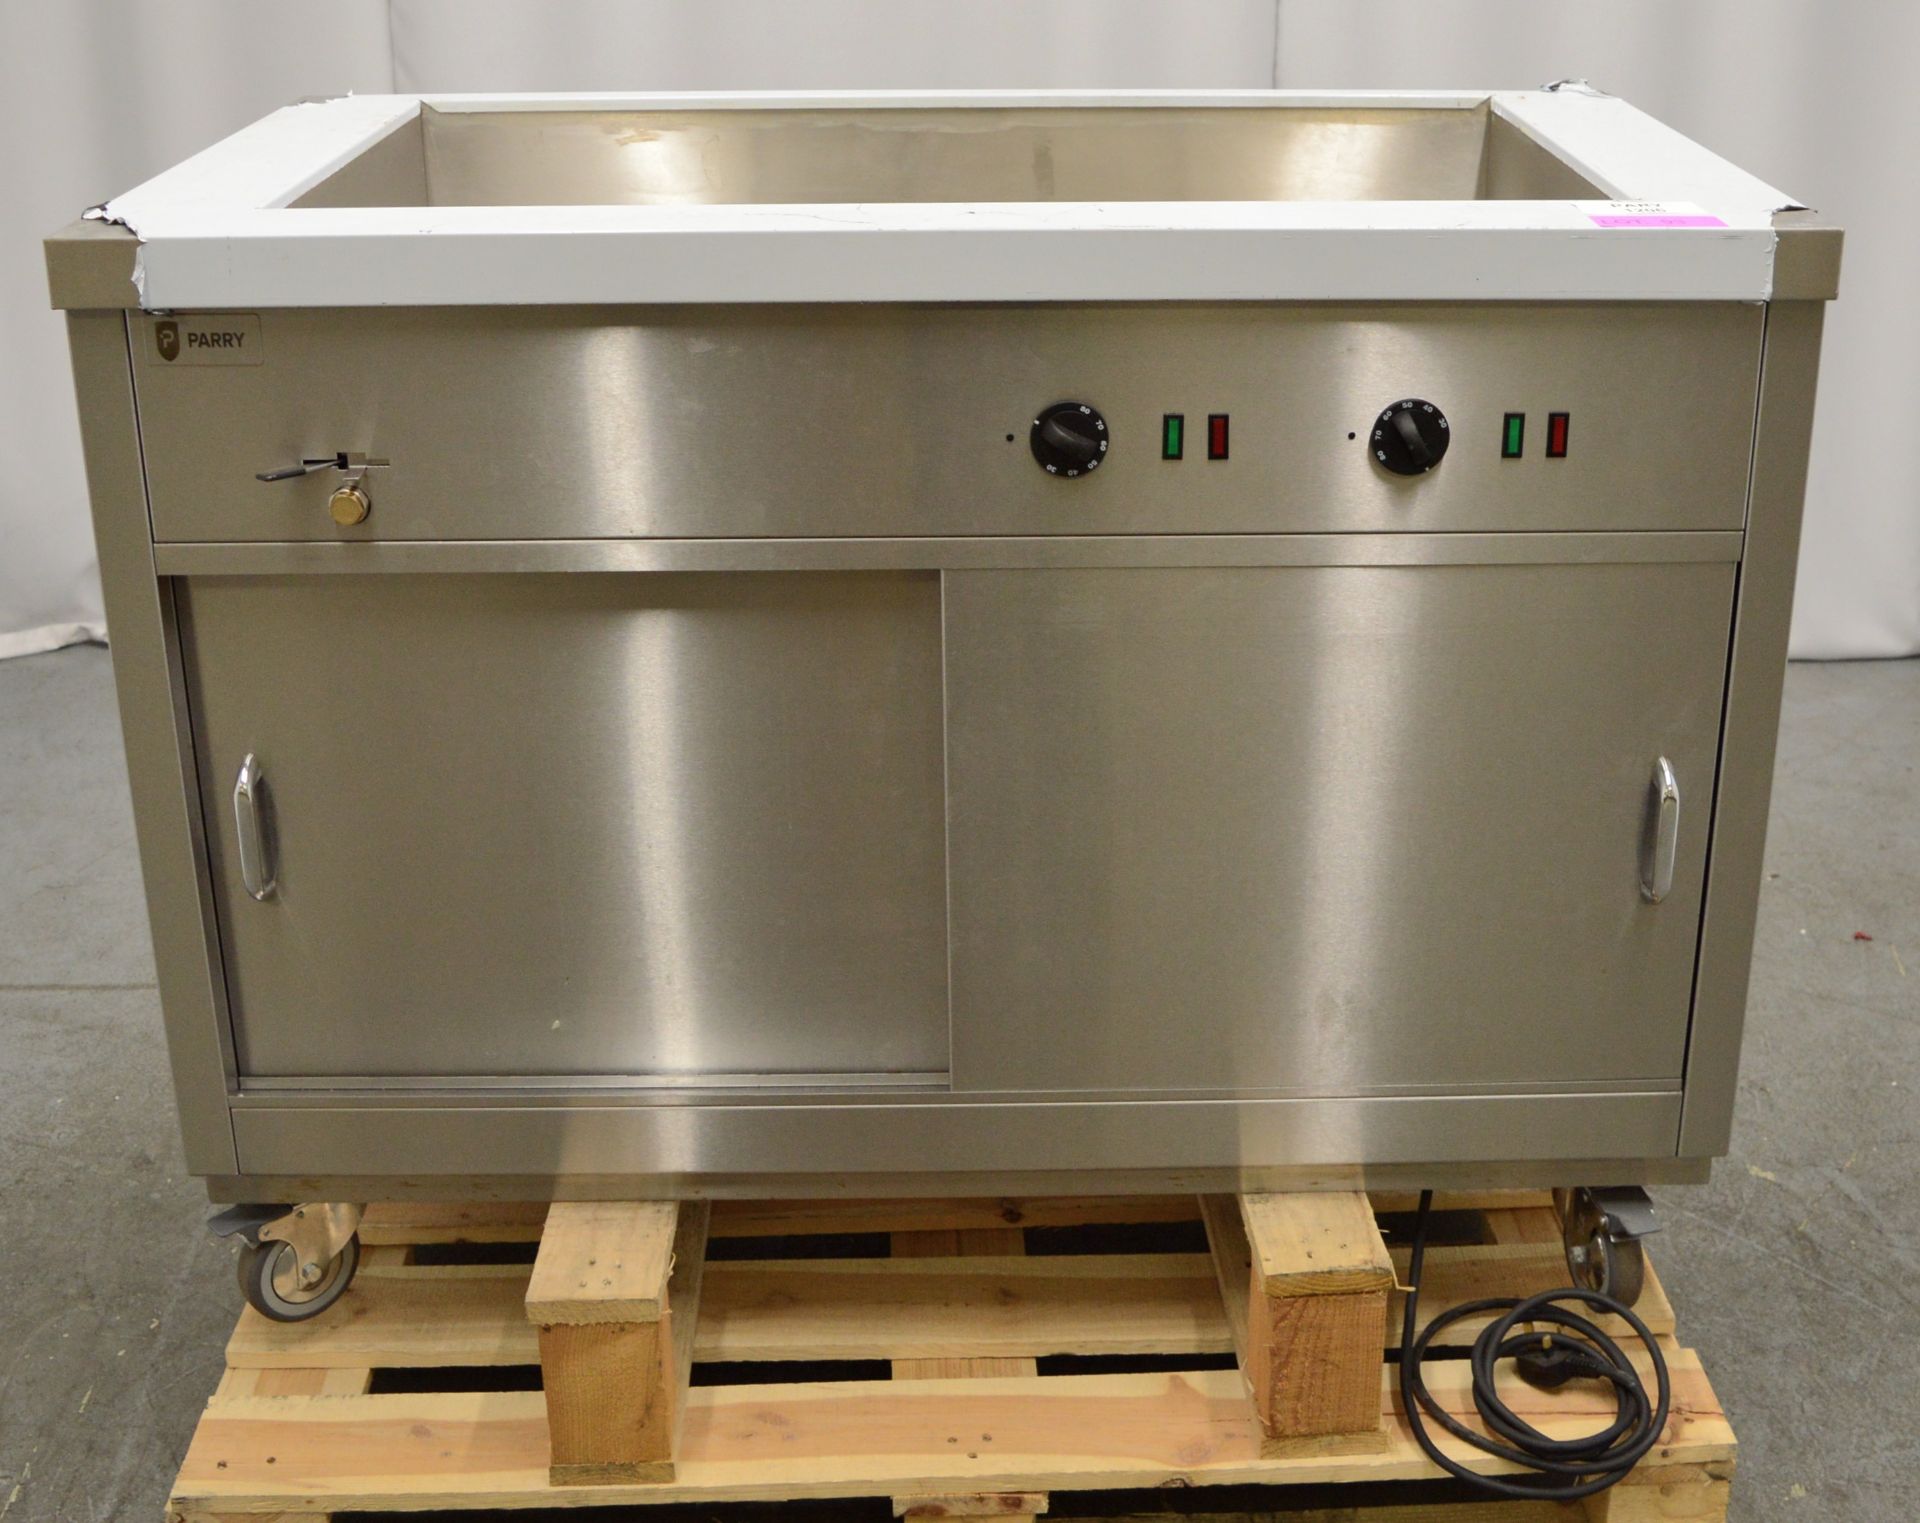 Parry HOT12BM stainless steel bain marie hot cupboard, 1200x650x900mm (LxDxH) 230v